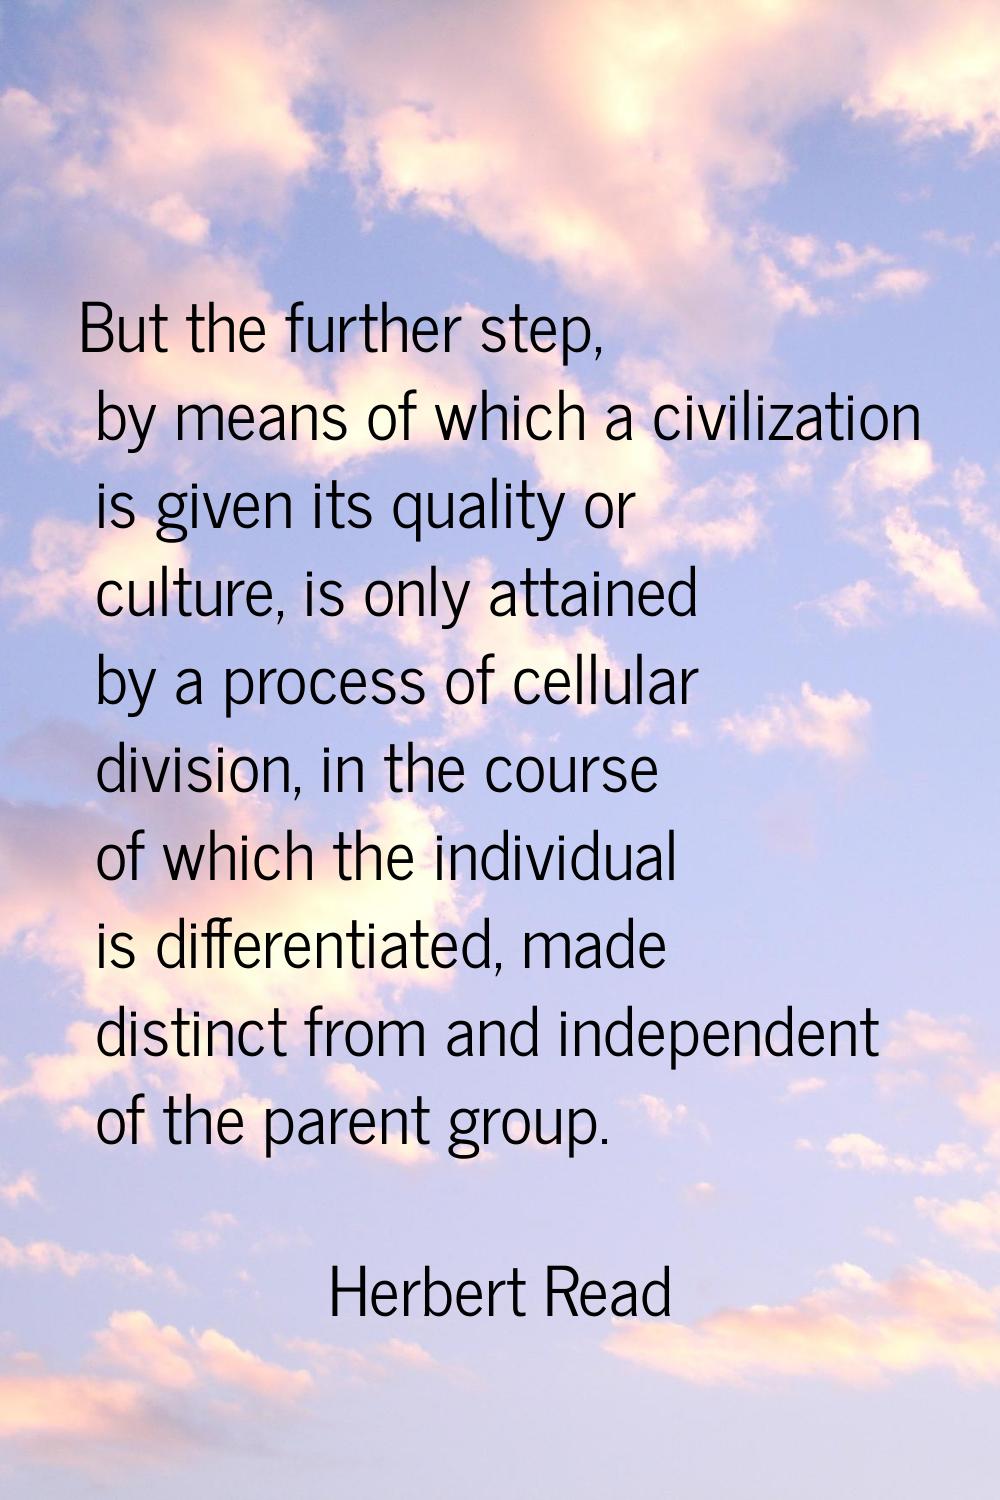 But the further step, by means of which a civilization is given its quality or culture, is only att